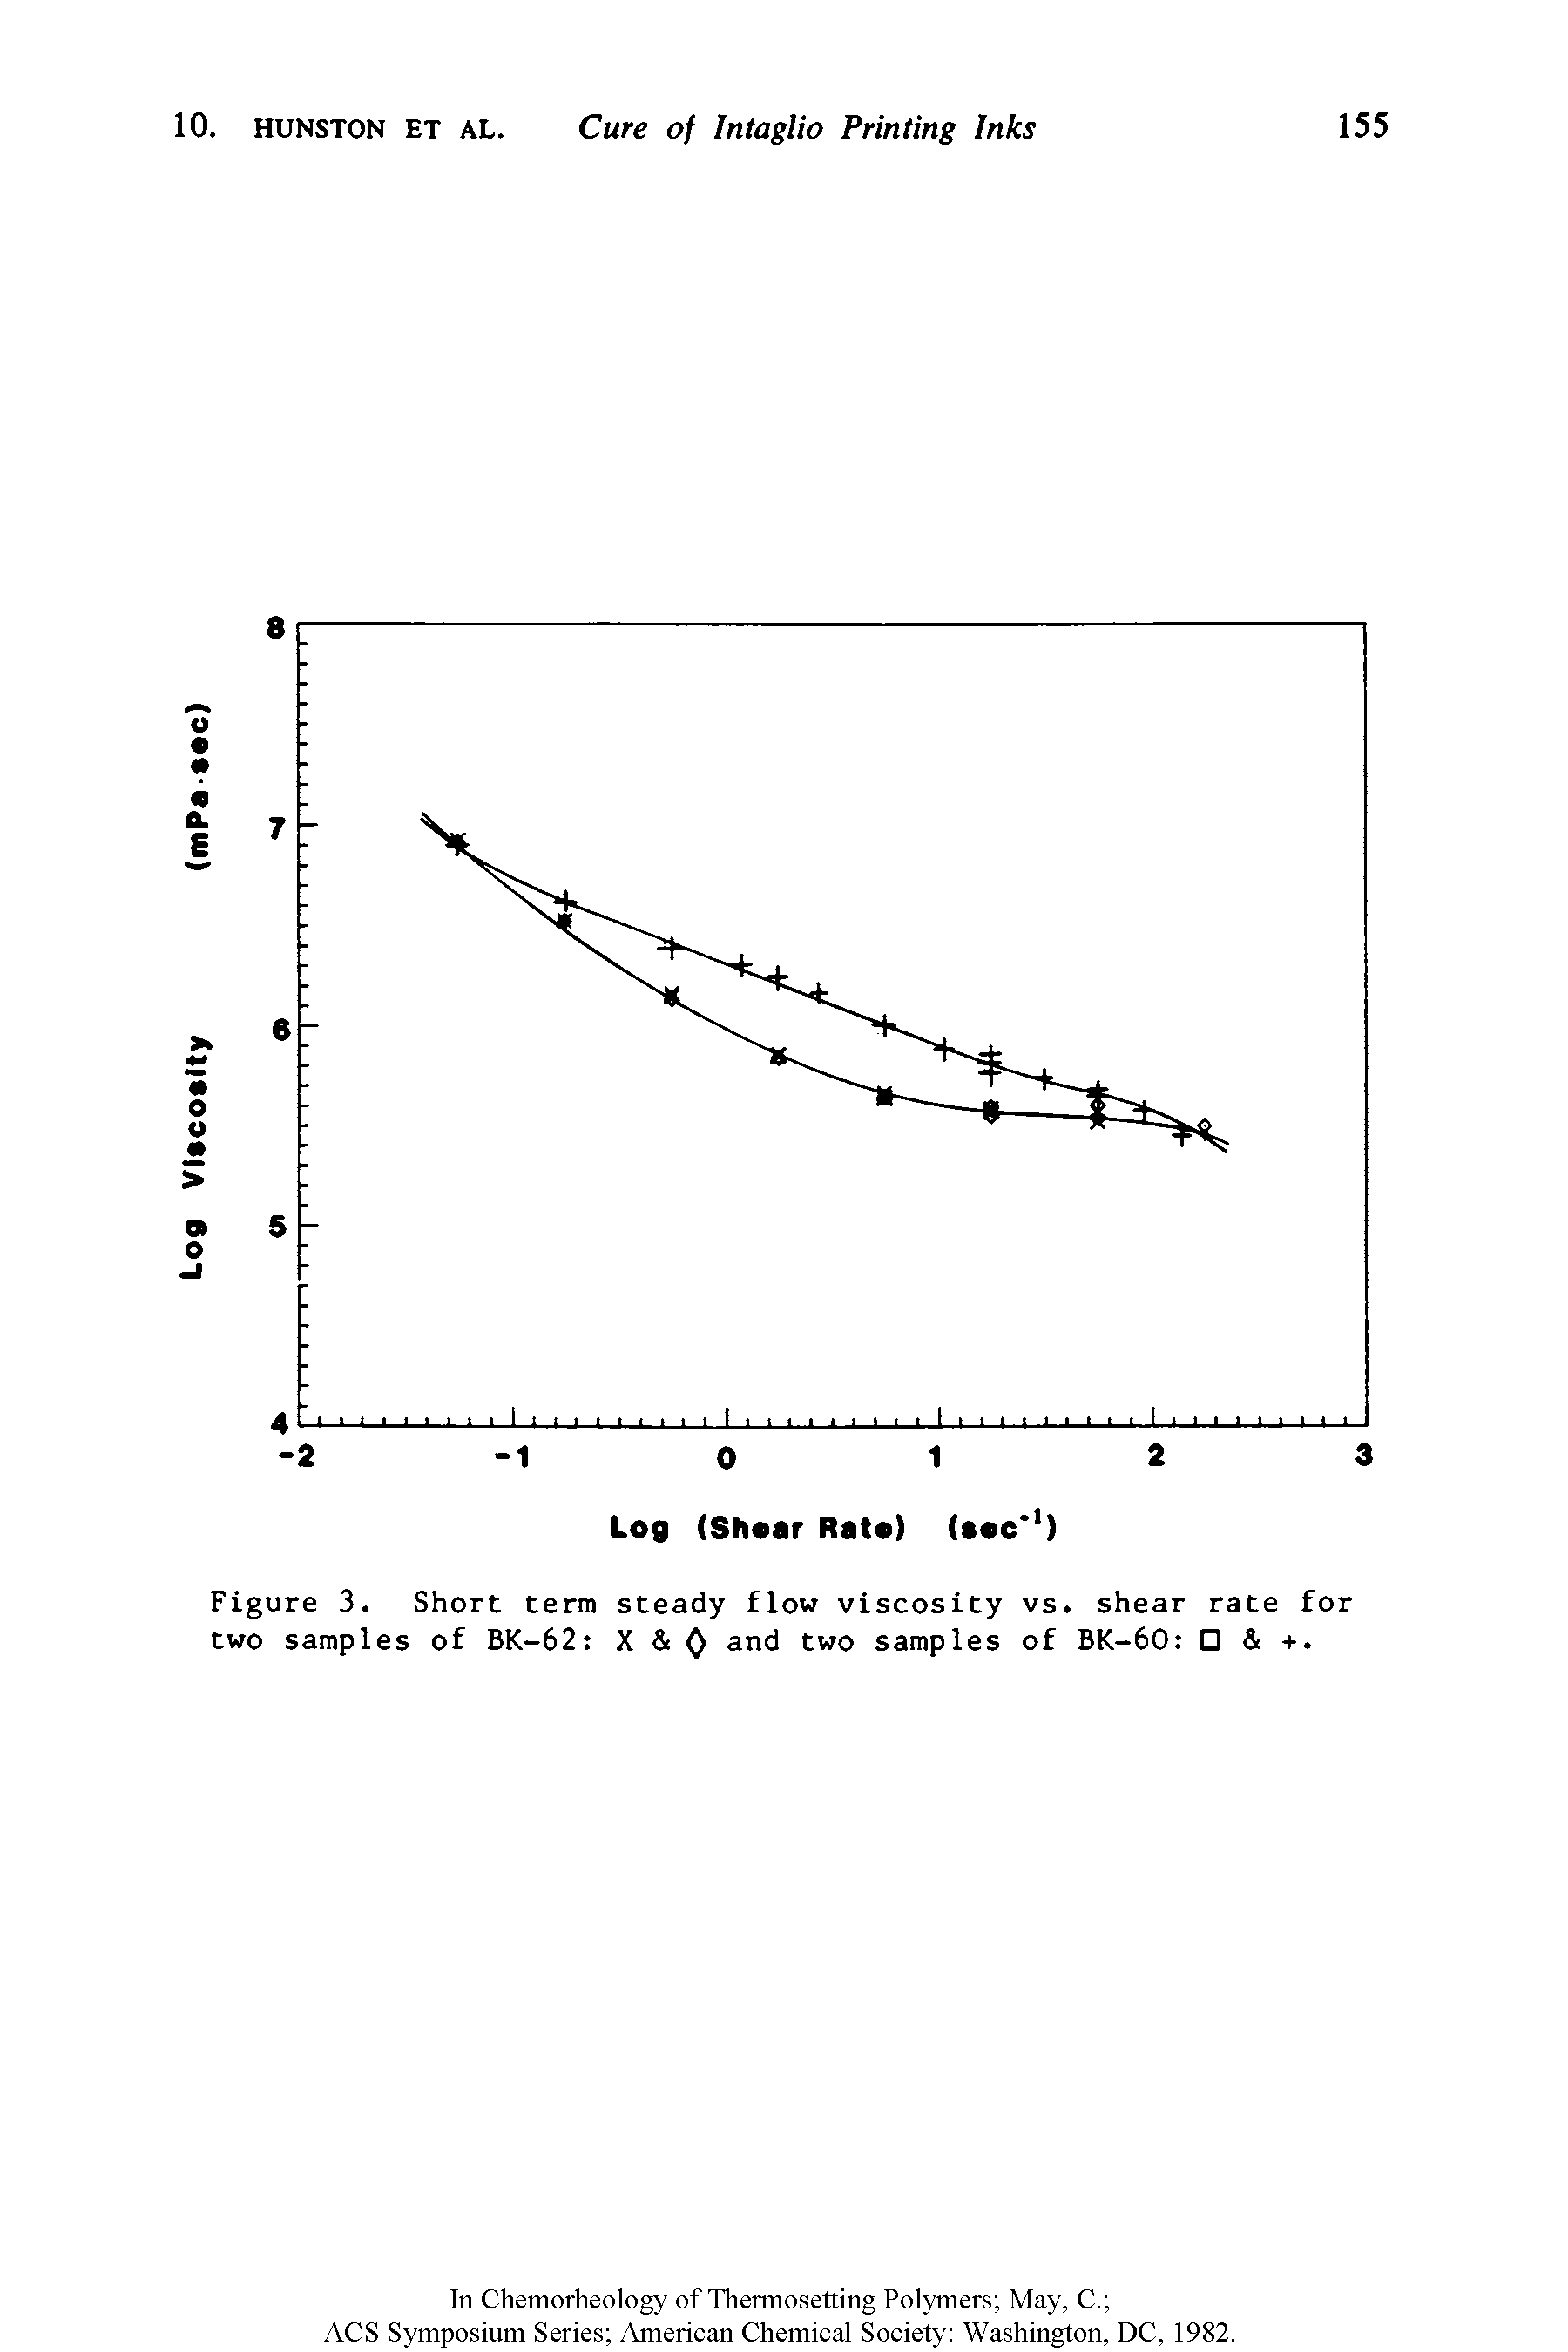 Figure 3. Short term steady flow viscosity vs shear rate for two samples of BK-62 X and two samples of BK-60 +.